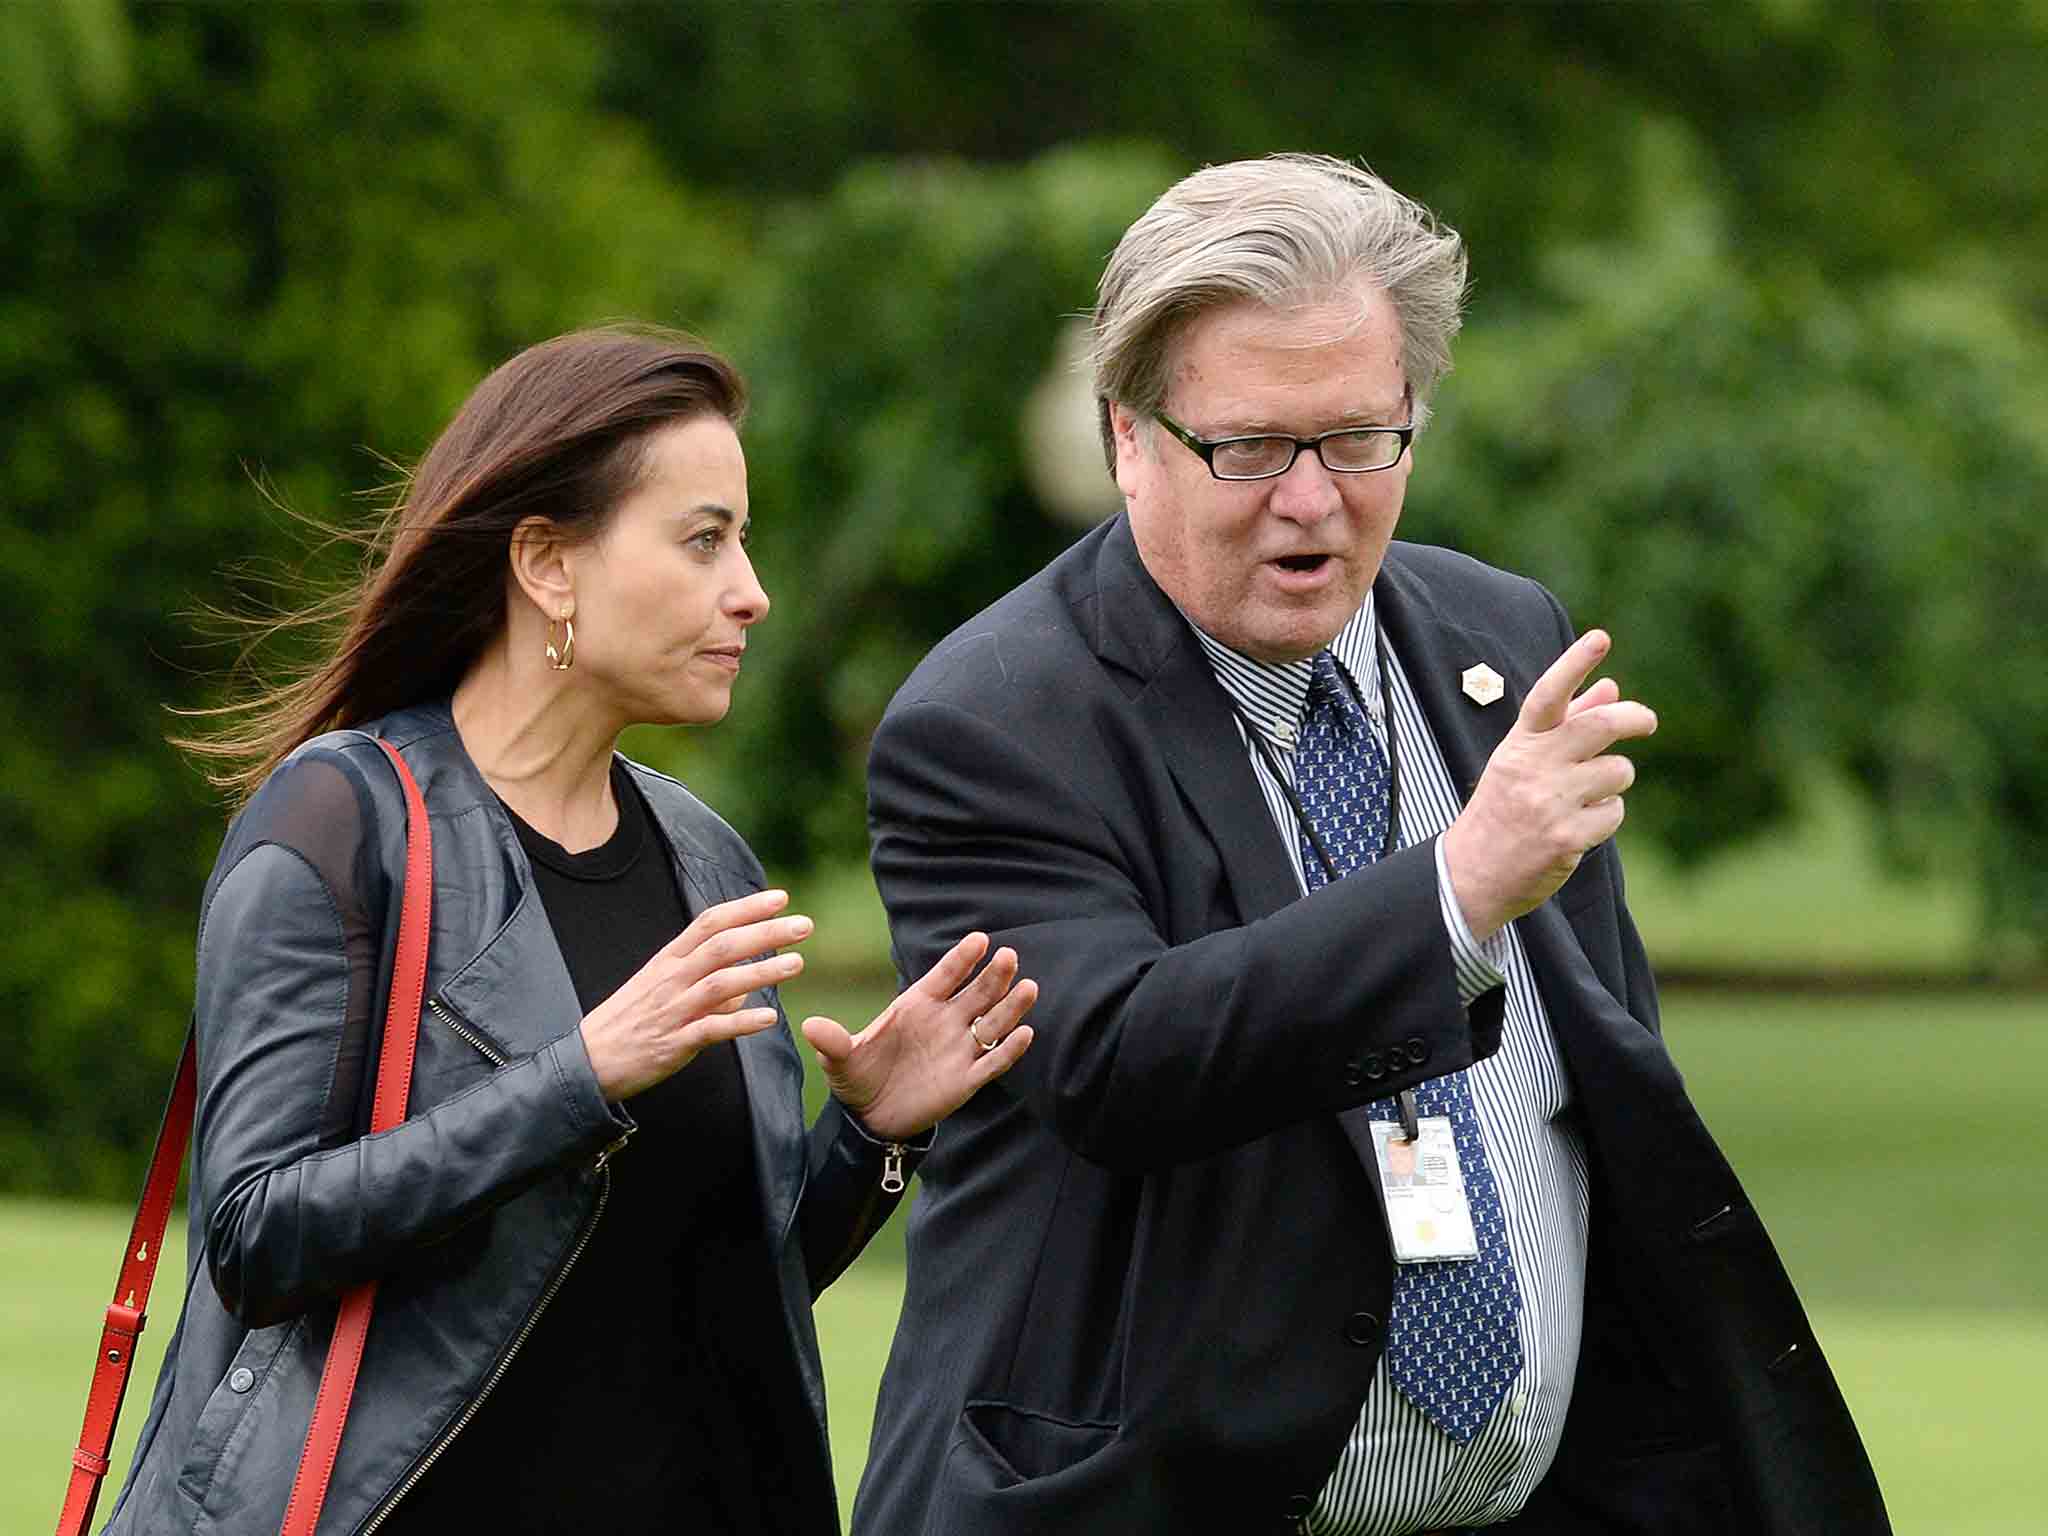 Dina Powell, pictured with former Trump chief strategist Steve Bannon, will quit the White House next year